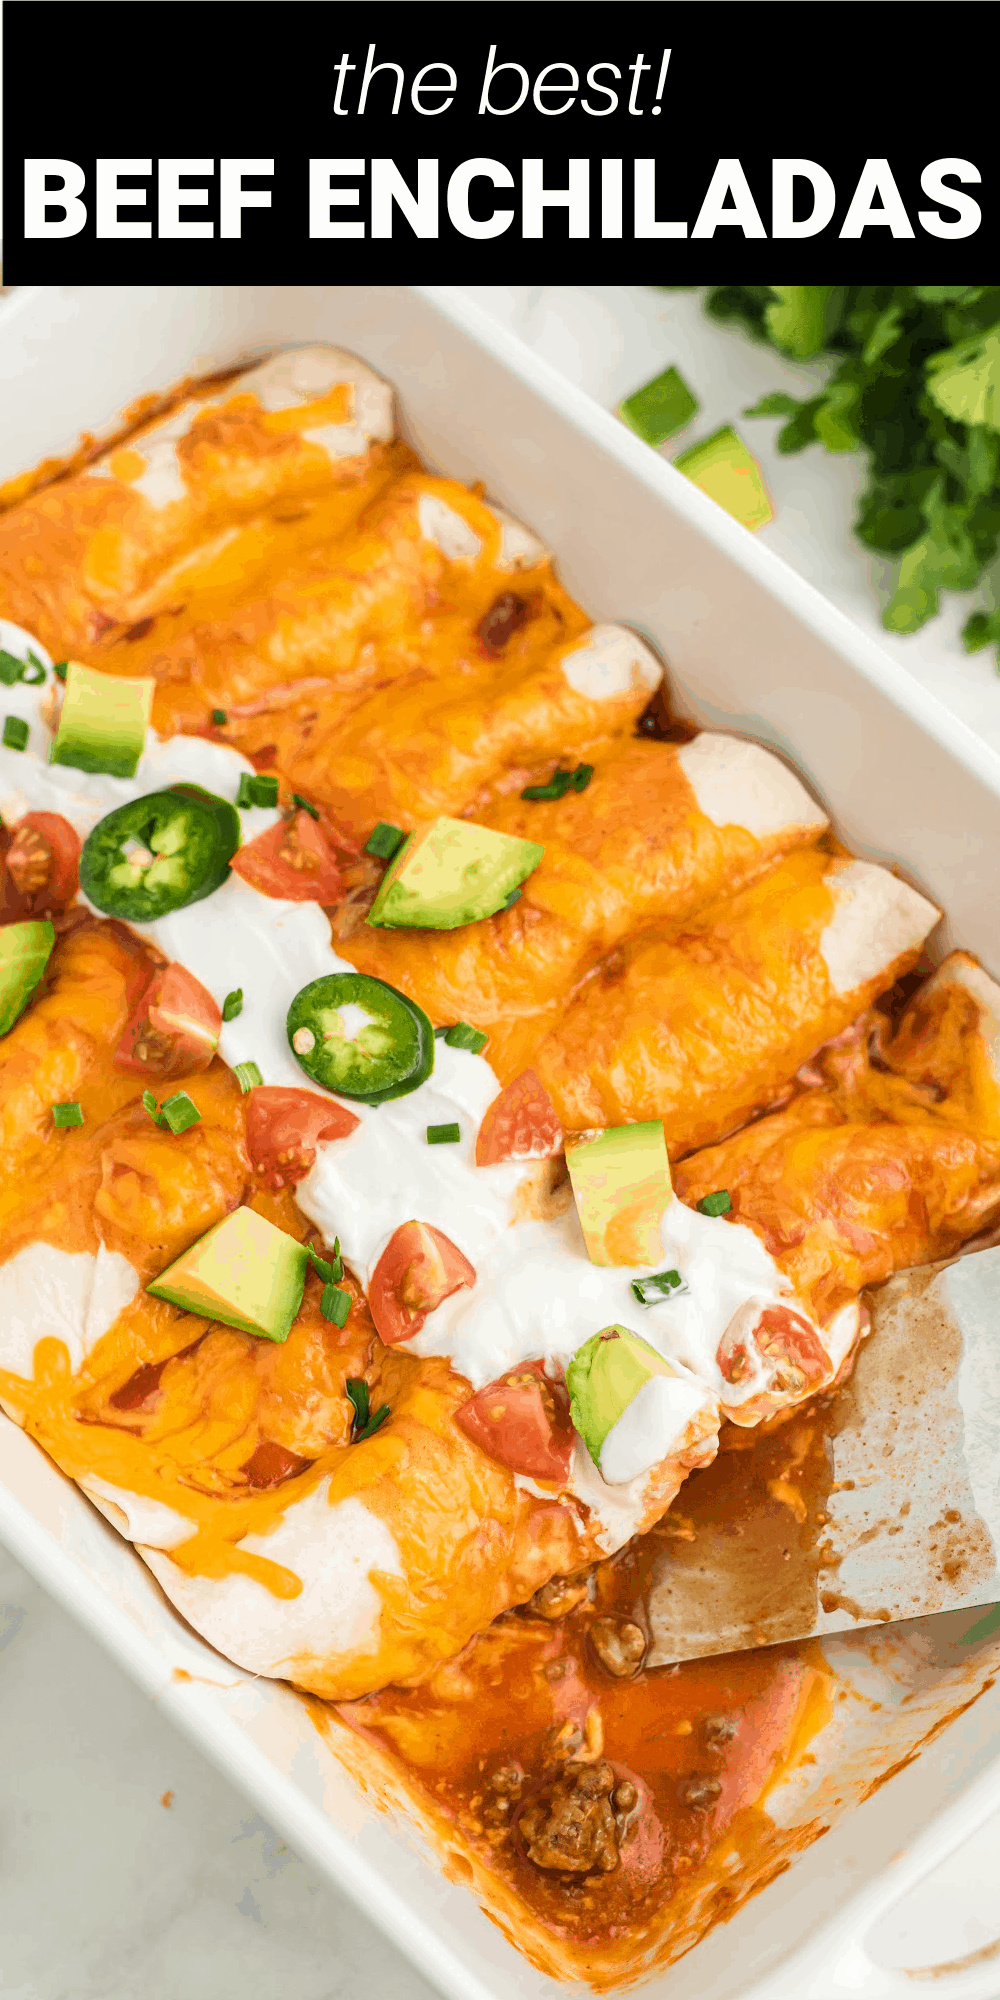 This beef enchiladas recipe is a quick and easy dinner option everyone loves. You only need five ingredients to have amazing Mexican food at home.